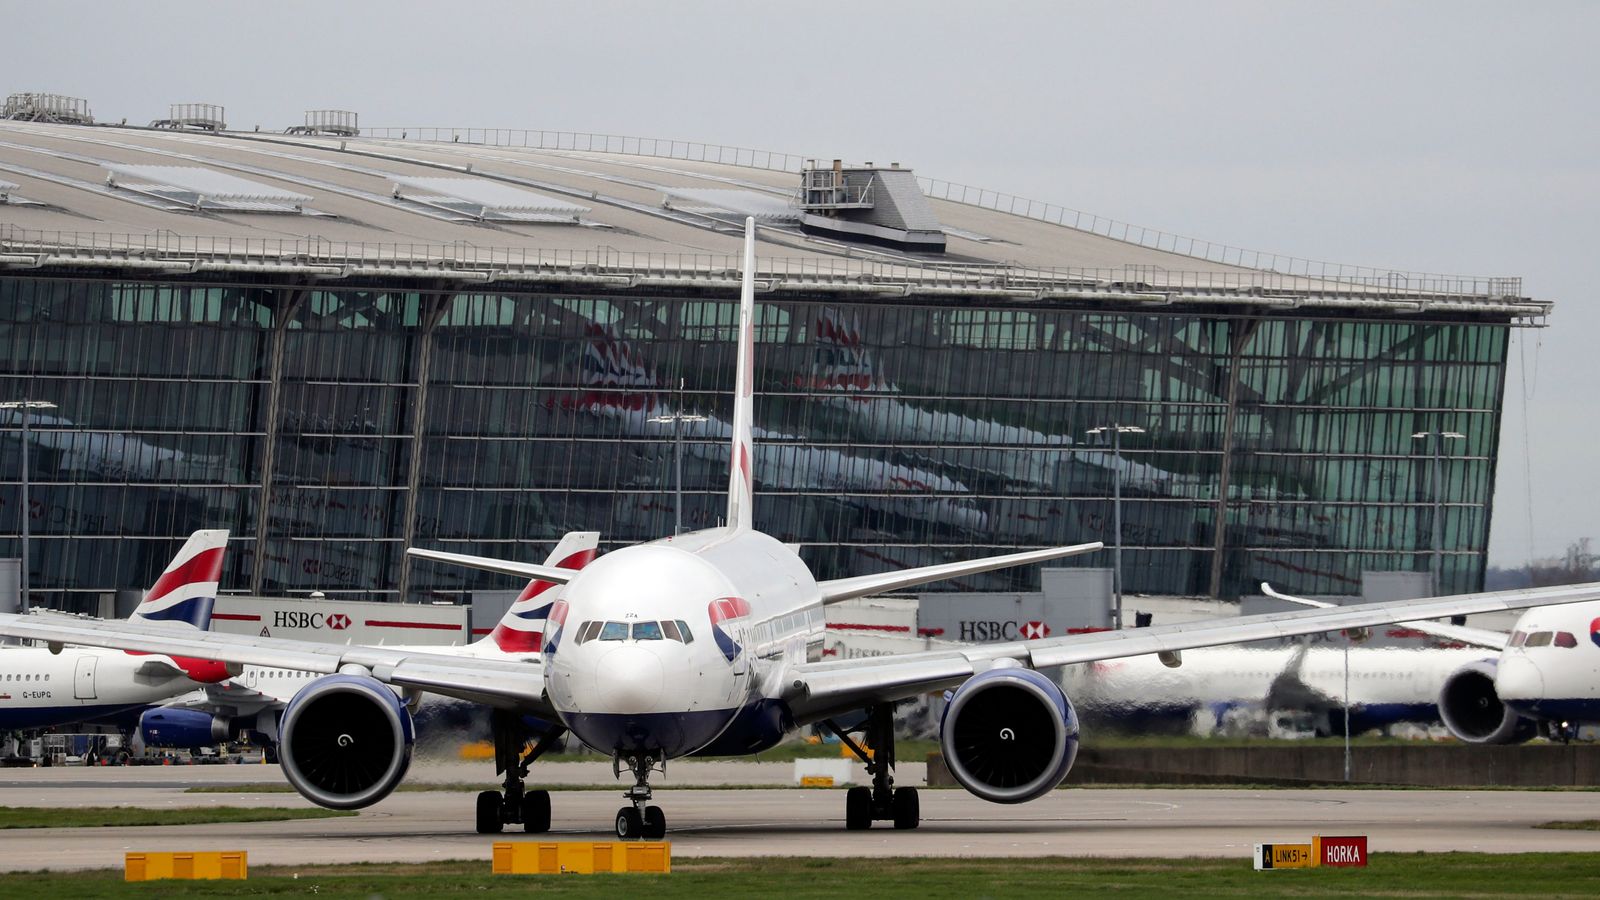 Heathrow passengers face flight disruption due to strong winds and staff shortages